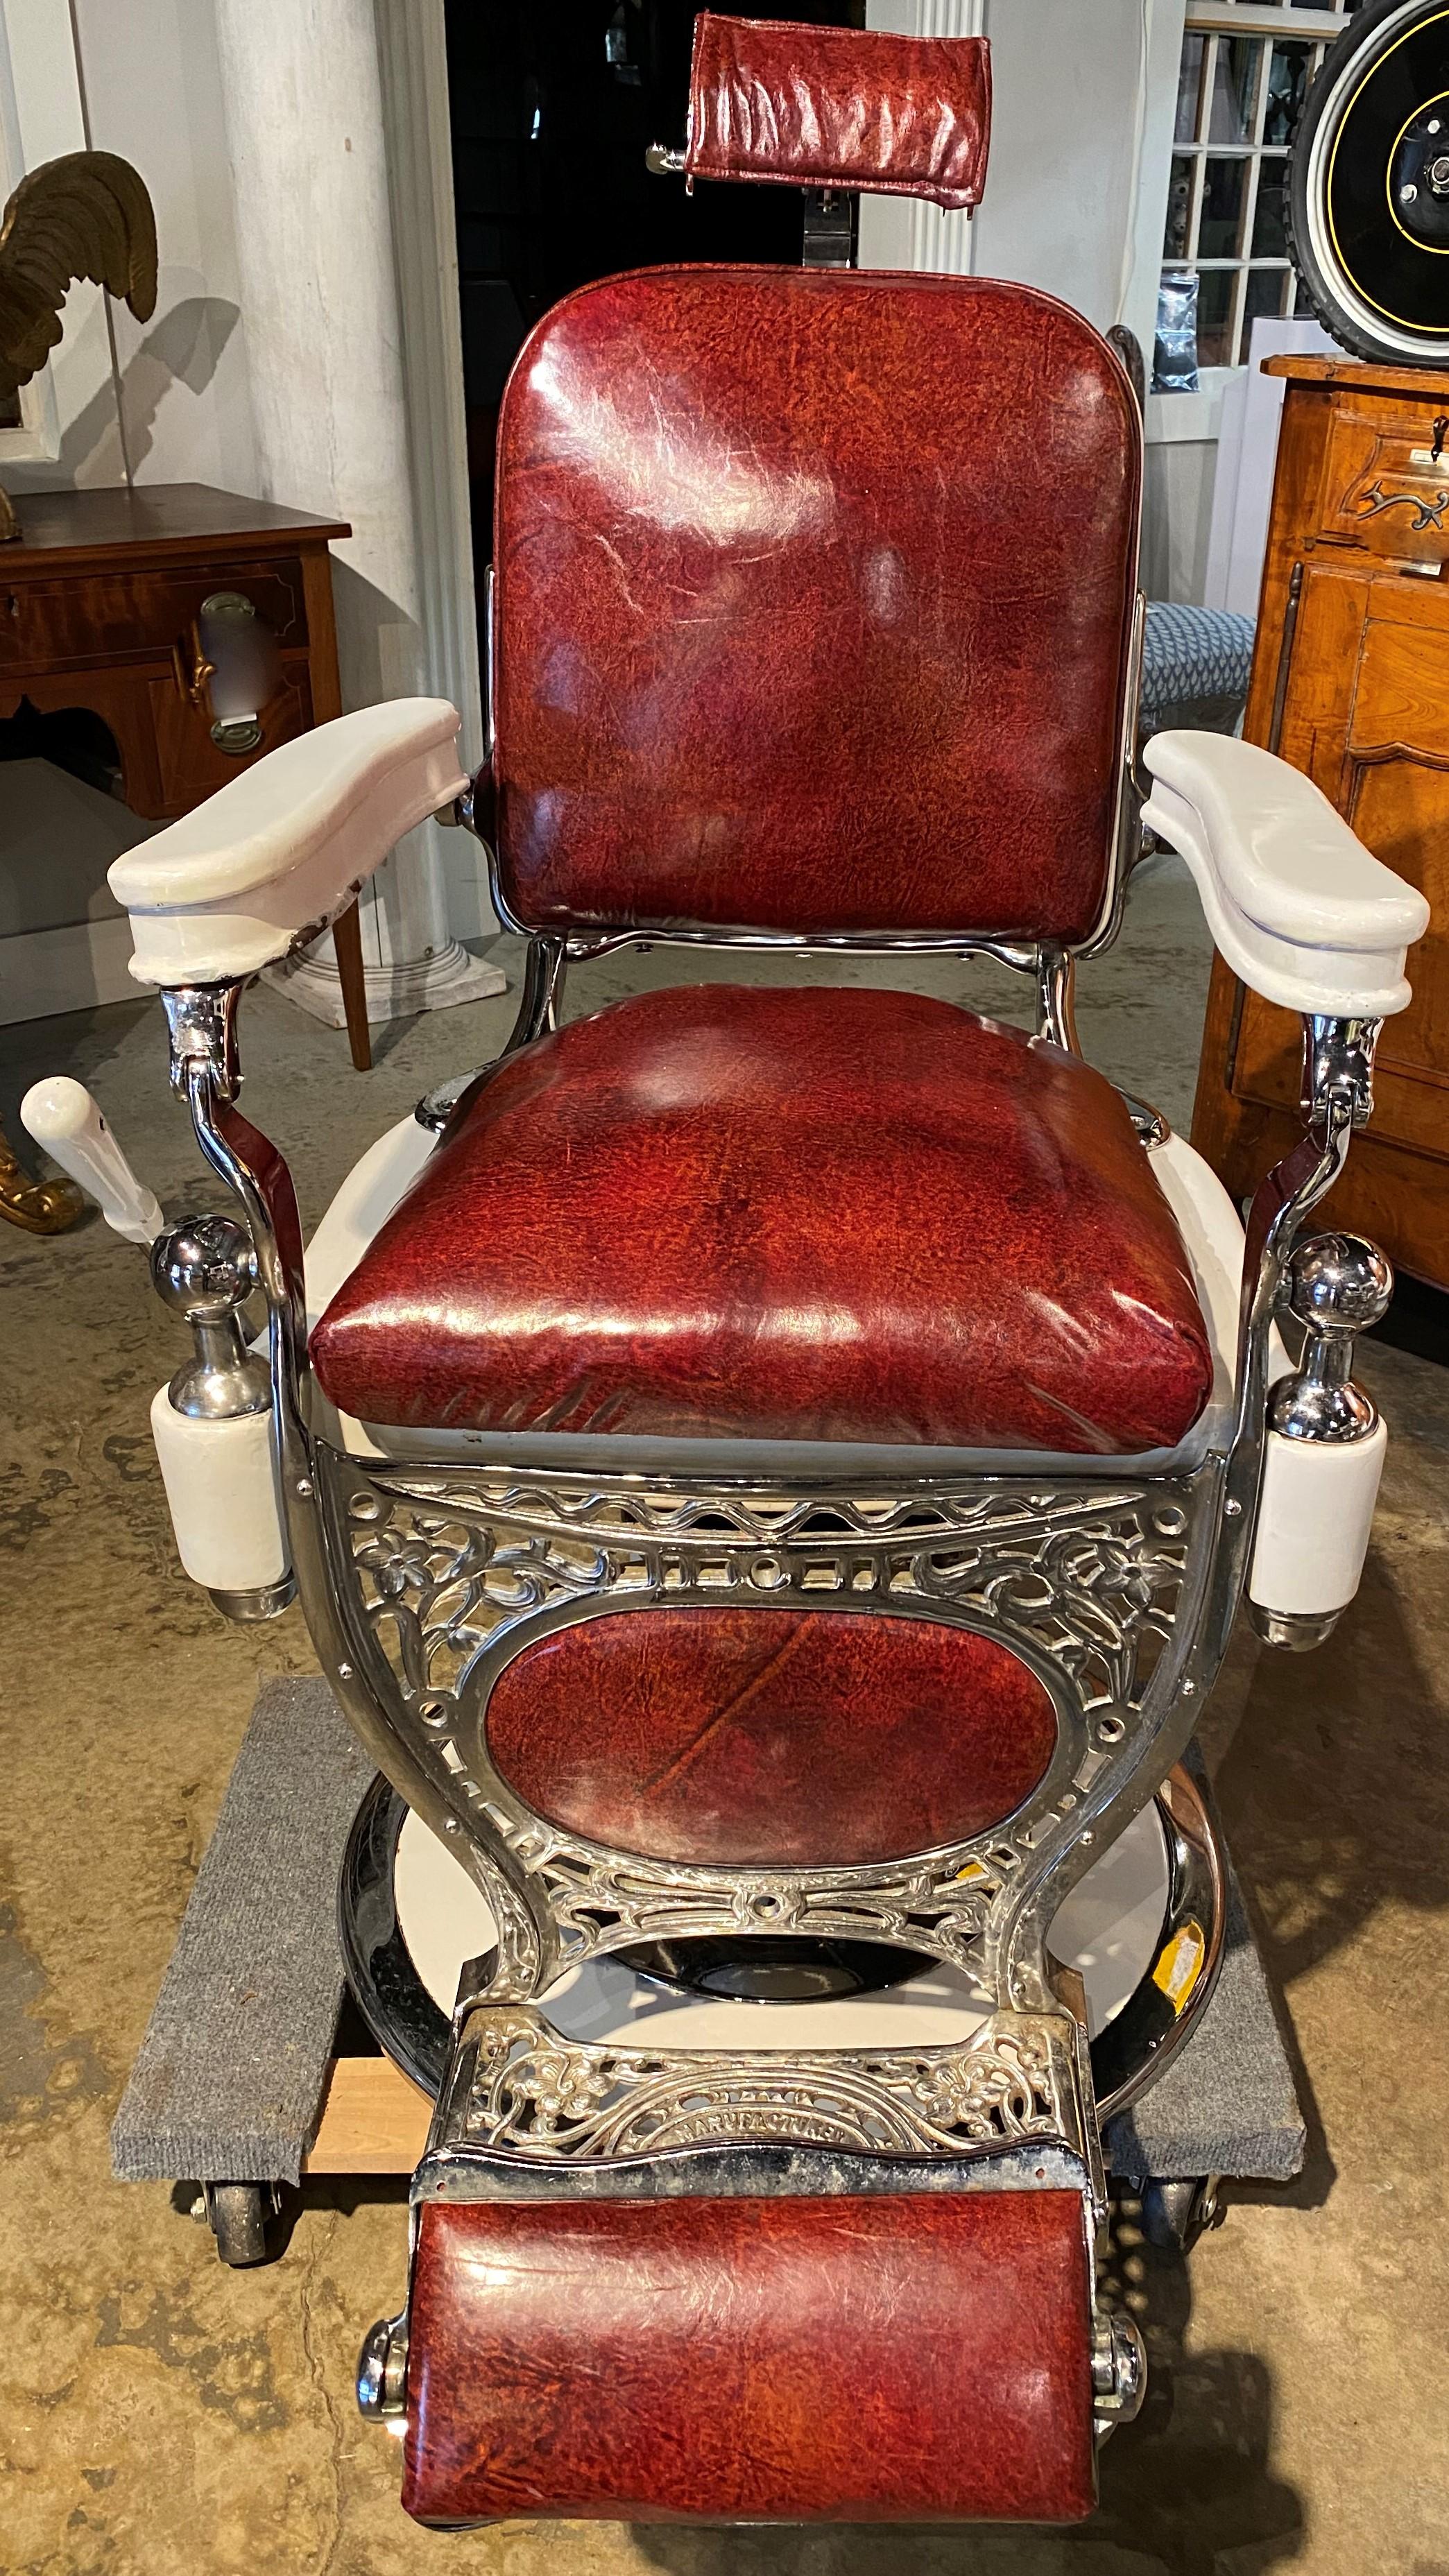 A fine example of a heavy chromed, porcelained, and scrolled metal frame barber chair by Theo A. Kochs, Chicago, with porcelain arms, red leather seat, back, headrest, and footrest, adjustable back and swivel seat height (hydraulic pump handle on